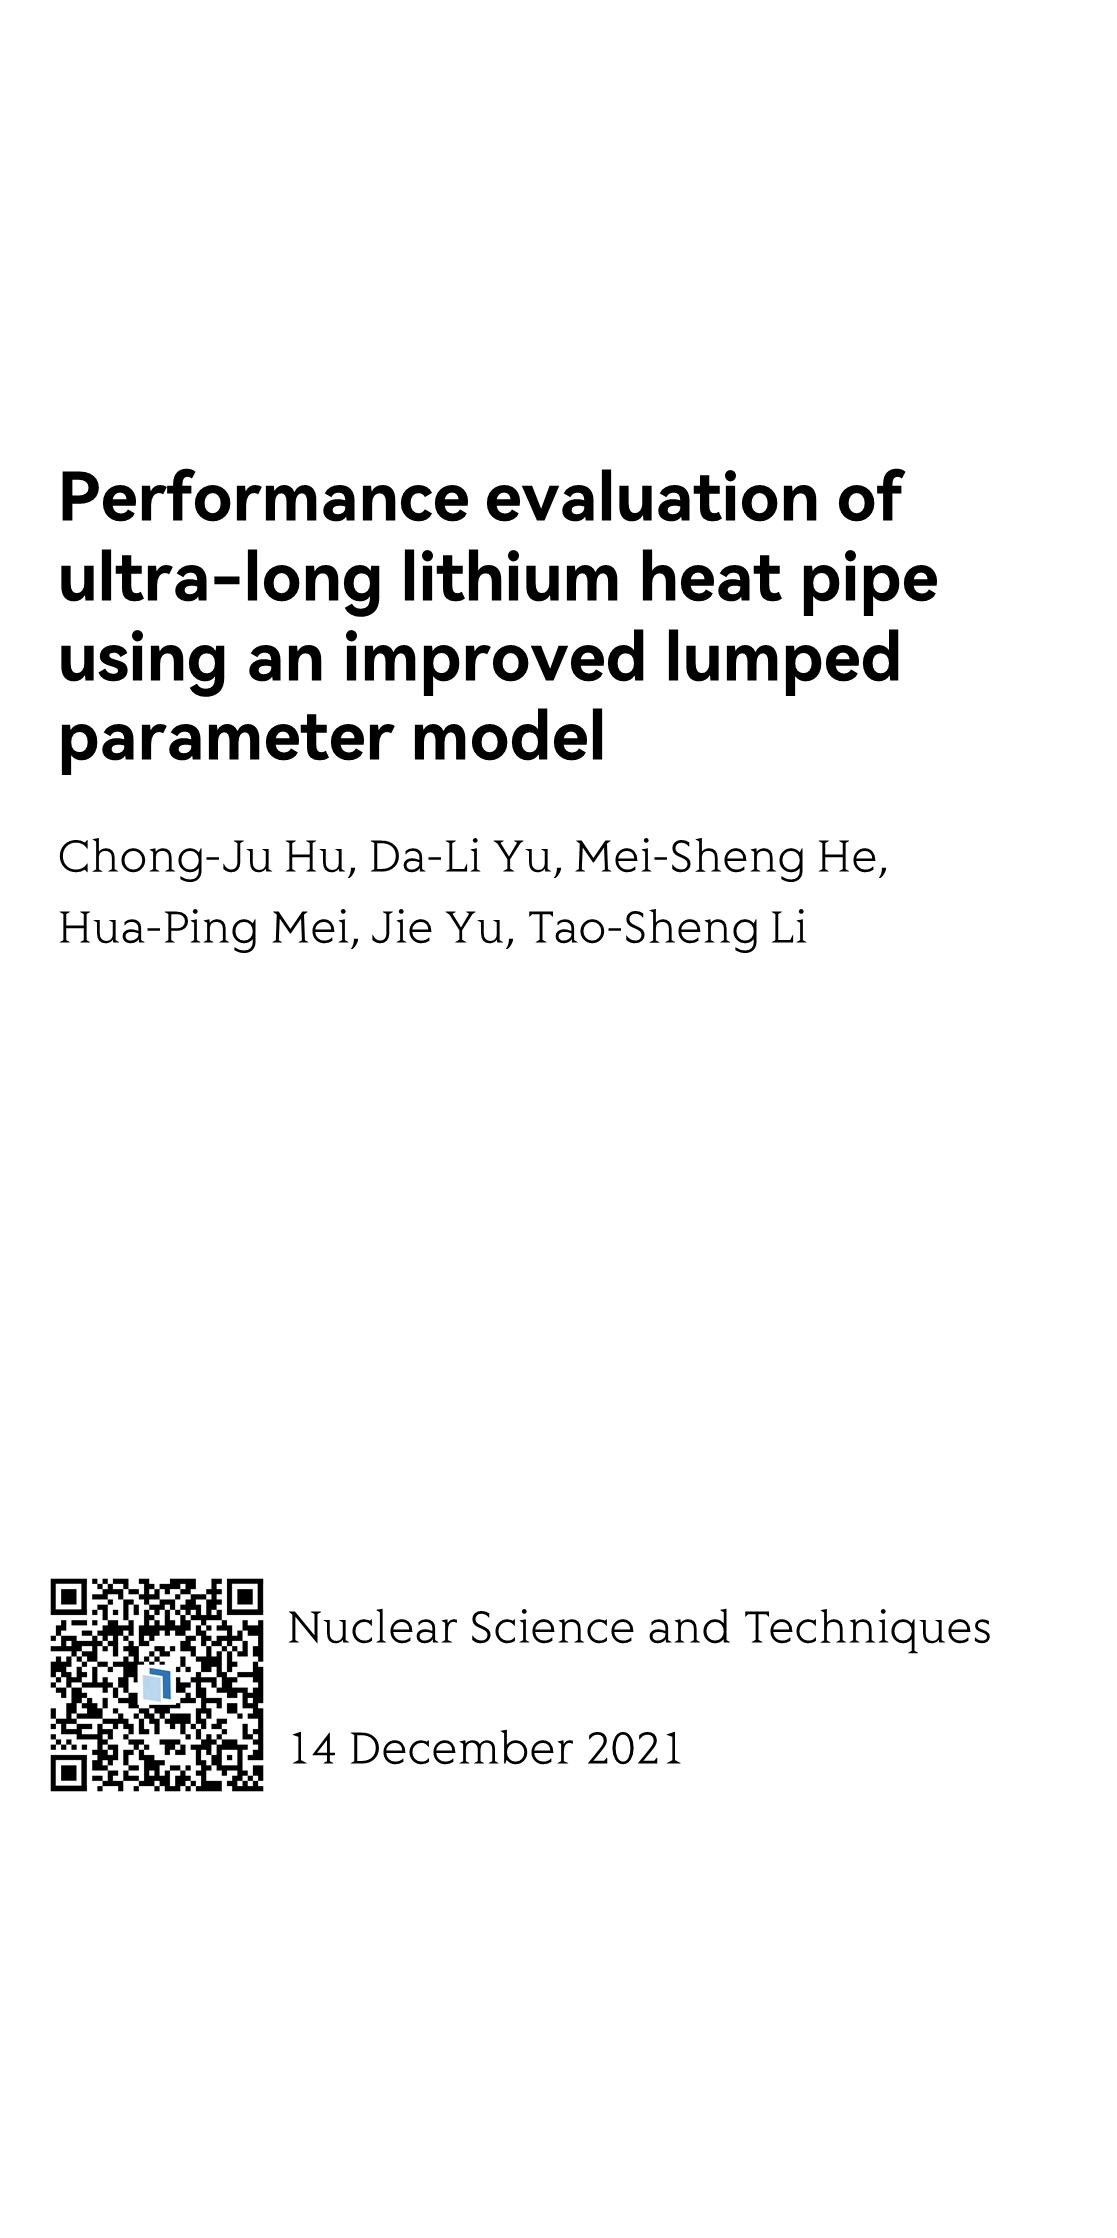 Performance evaluation of ultra-long lithium heat pipe using an improved lumped parameter model_1